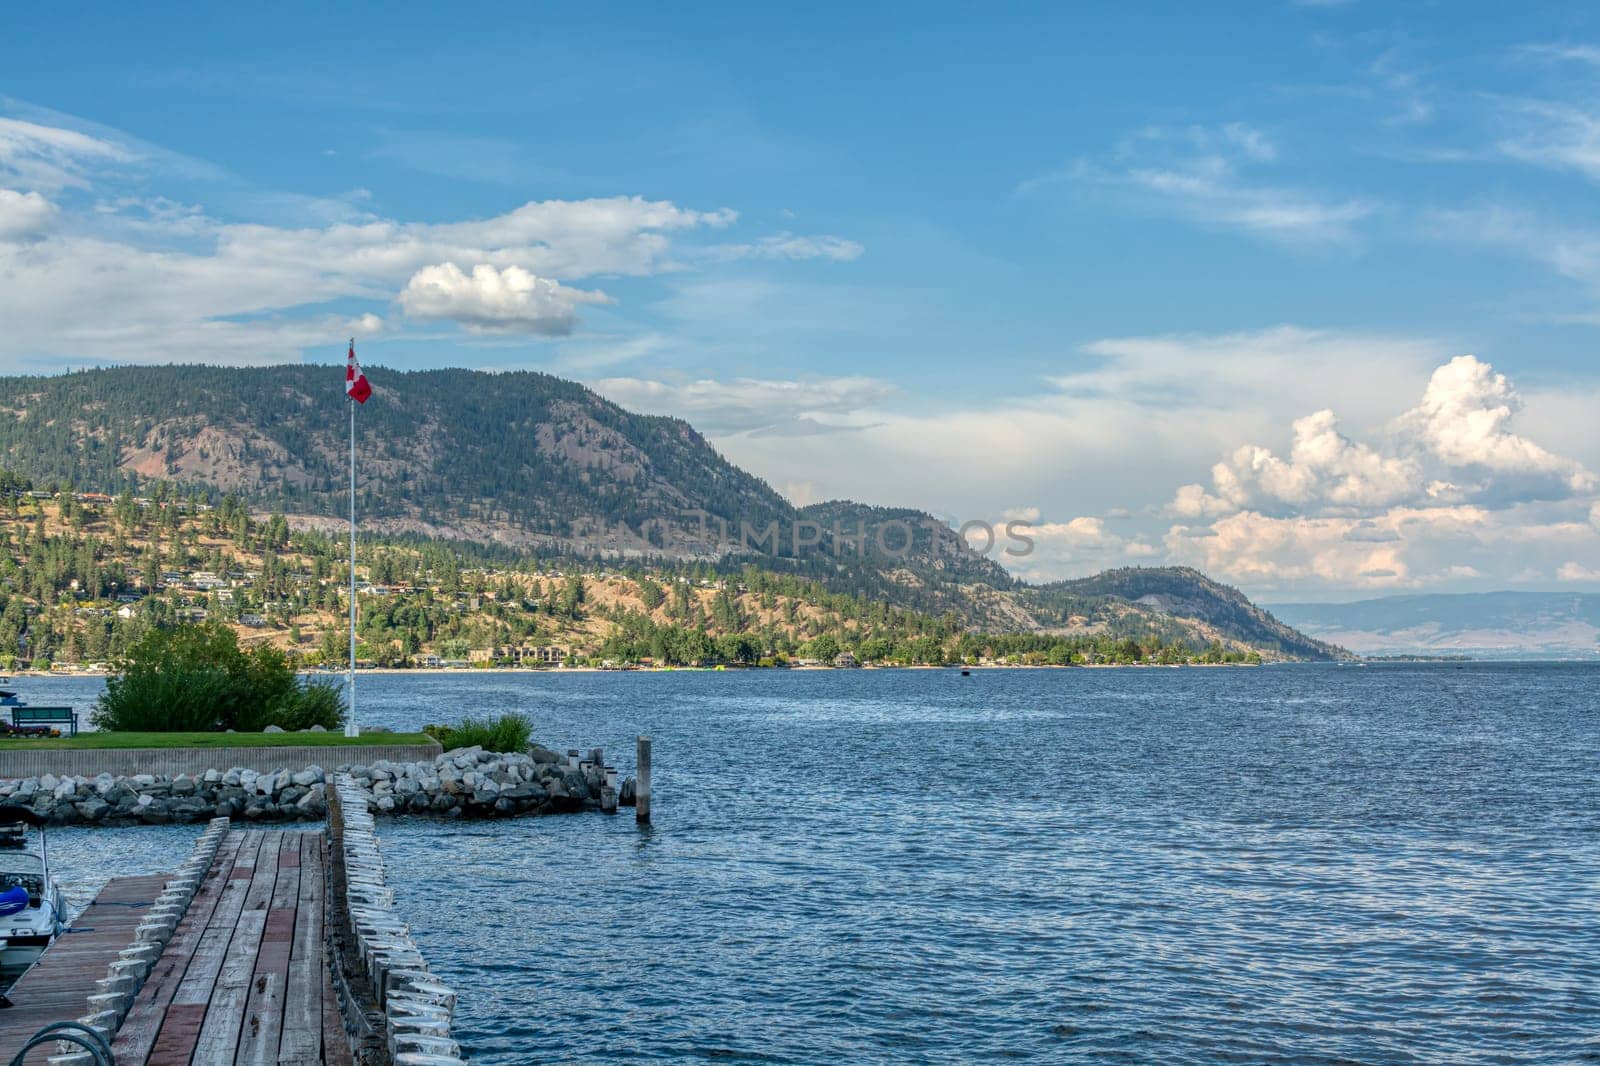 Okanagan lake overview on a bright summer day. Boat bay with canadian flag on the post